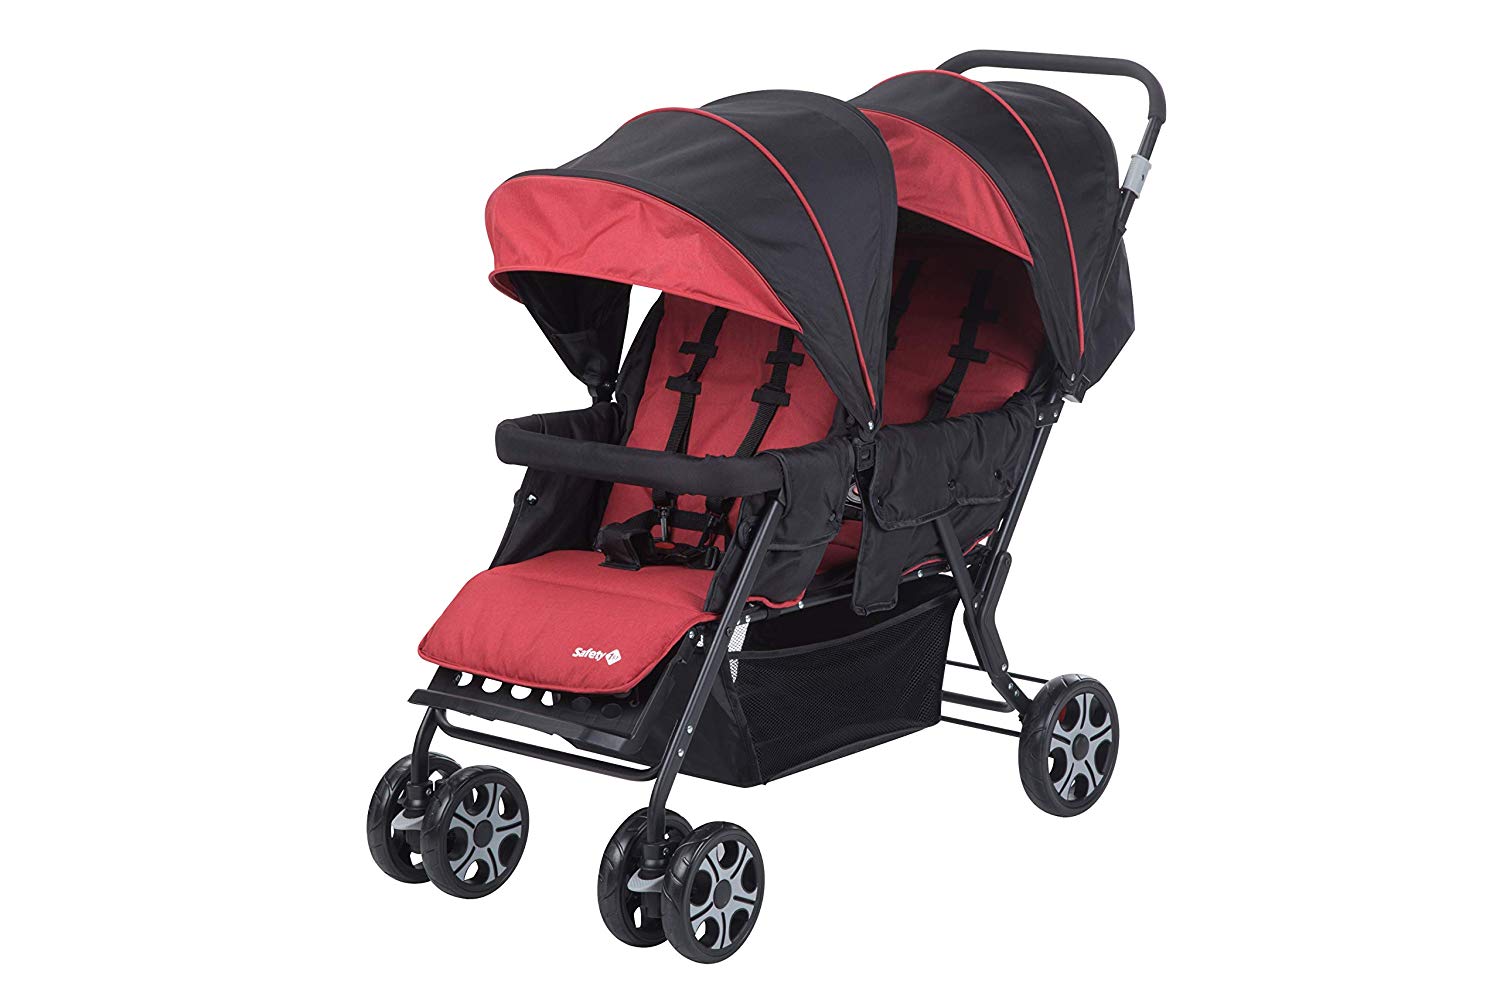 Safety 1st sibling stroller Teamy, agile twin stroller, stable metal frame with low weight, adjustable backrests, compact folding size, usable from birth to 3.5 years, red chic